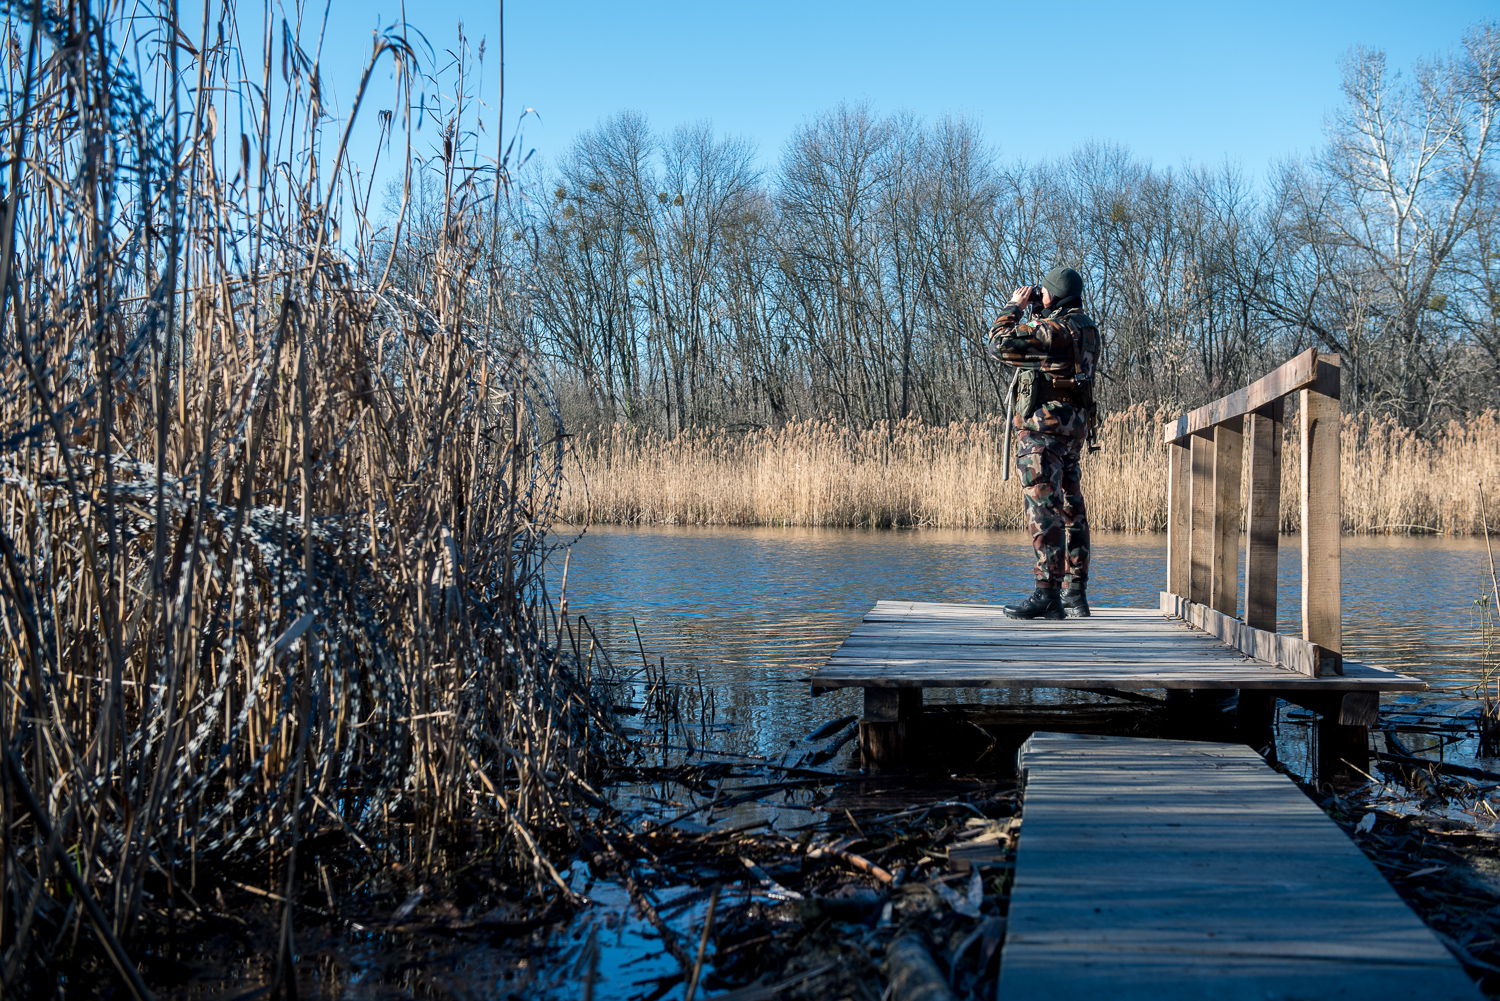  Woman soldier searching over  Ferenc main channel at the end of the barbed wire fence between Hungary and Serbia near Hercegszántó, Hungary 24 December 2017.  The fence was constructed in the middle of the European migration crisis in 2015, with the